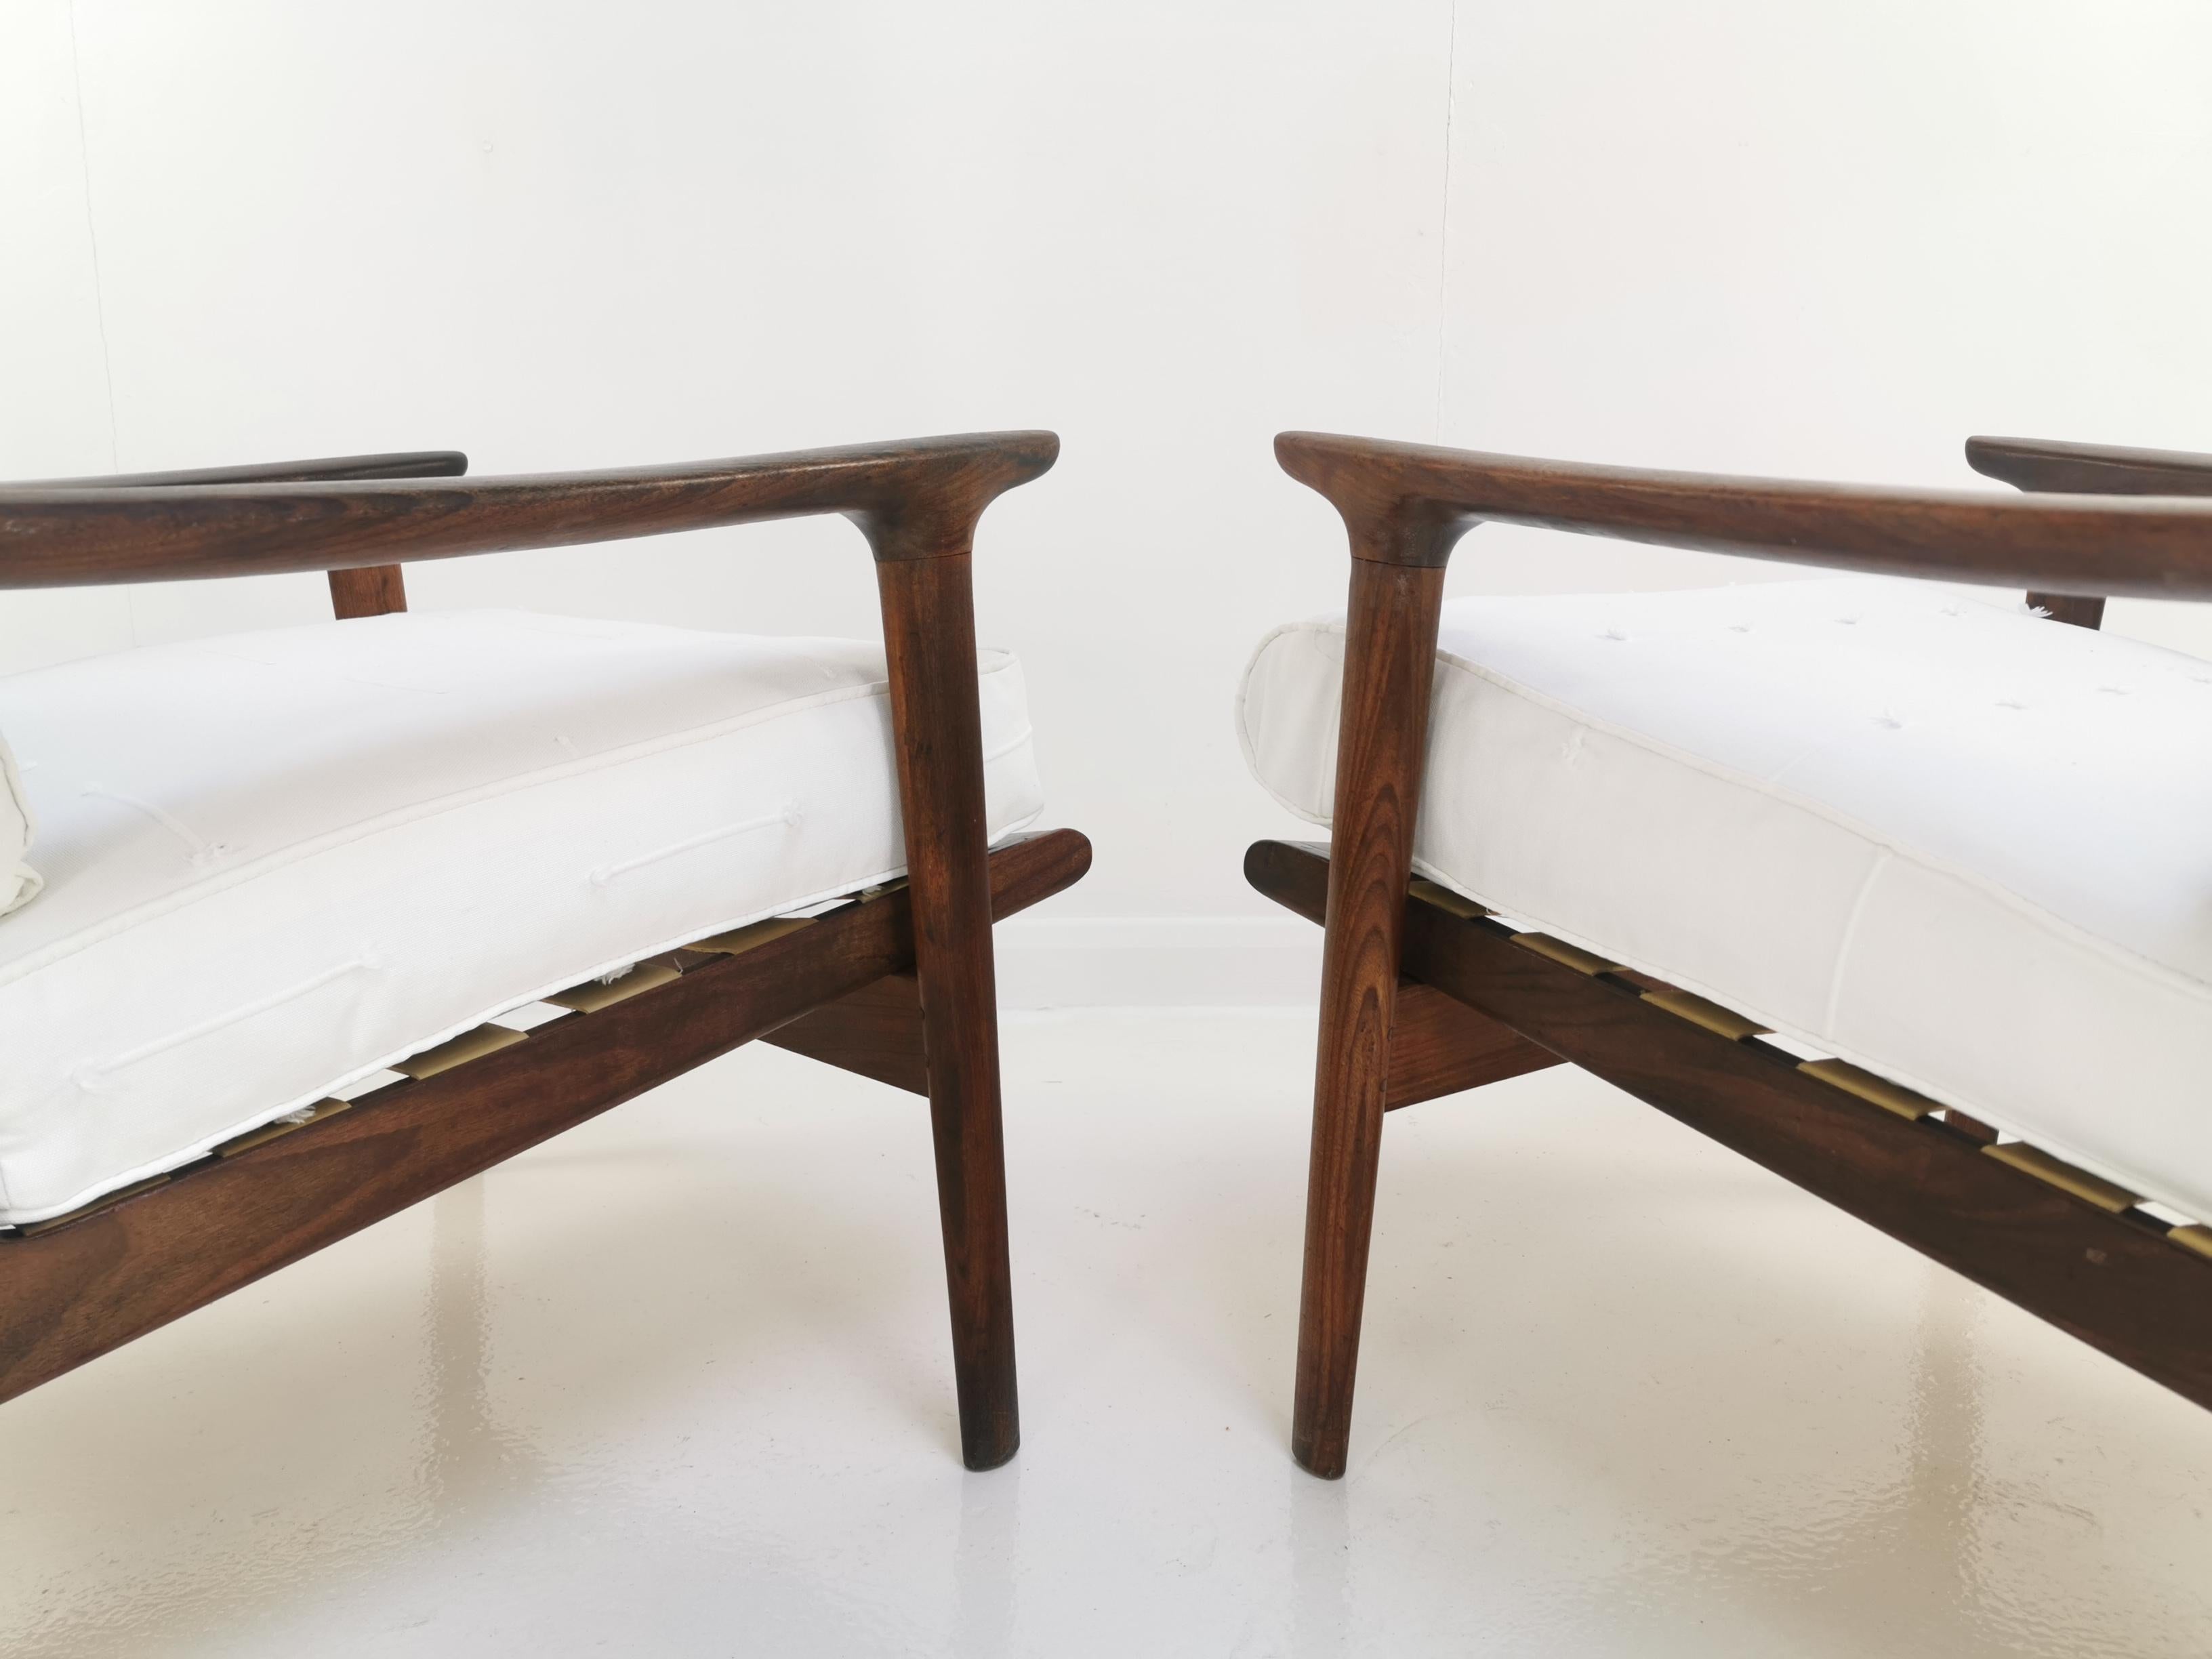 Guy Rogers Teak Lounge Chairs

A pair of his and hers 'New Yorker' low back armchairs manufactured by Guy Rogers of Liverpool, Great Britain.

Superb sculptural design. Sweeping arms, rich coloured afromosia teak and bright white upholstery.

Danish